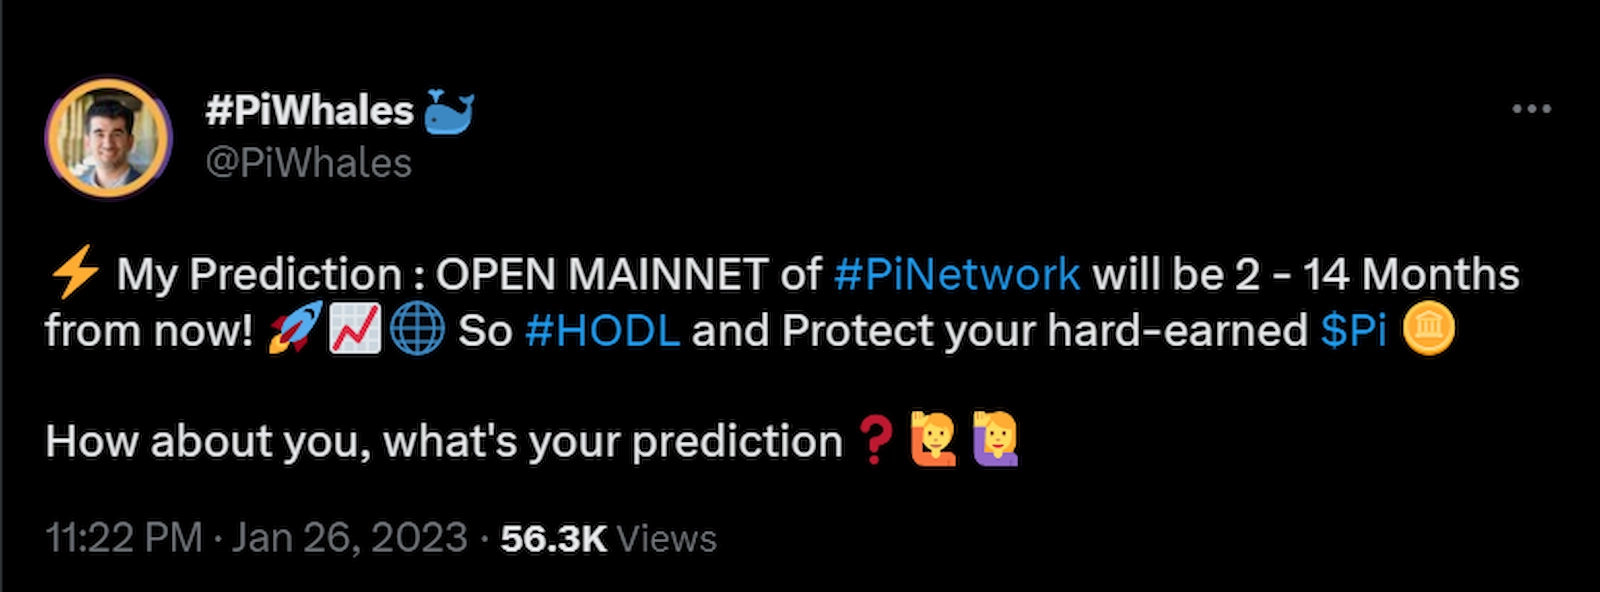 Anticipation around the launch of the Pi Network open mainnet remains high.